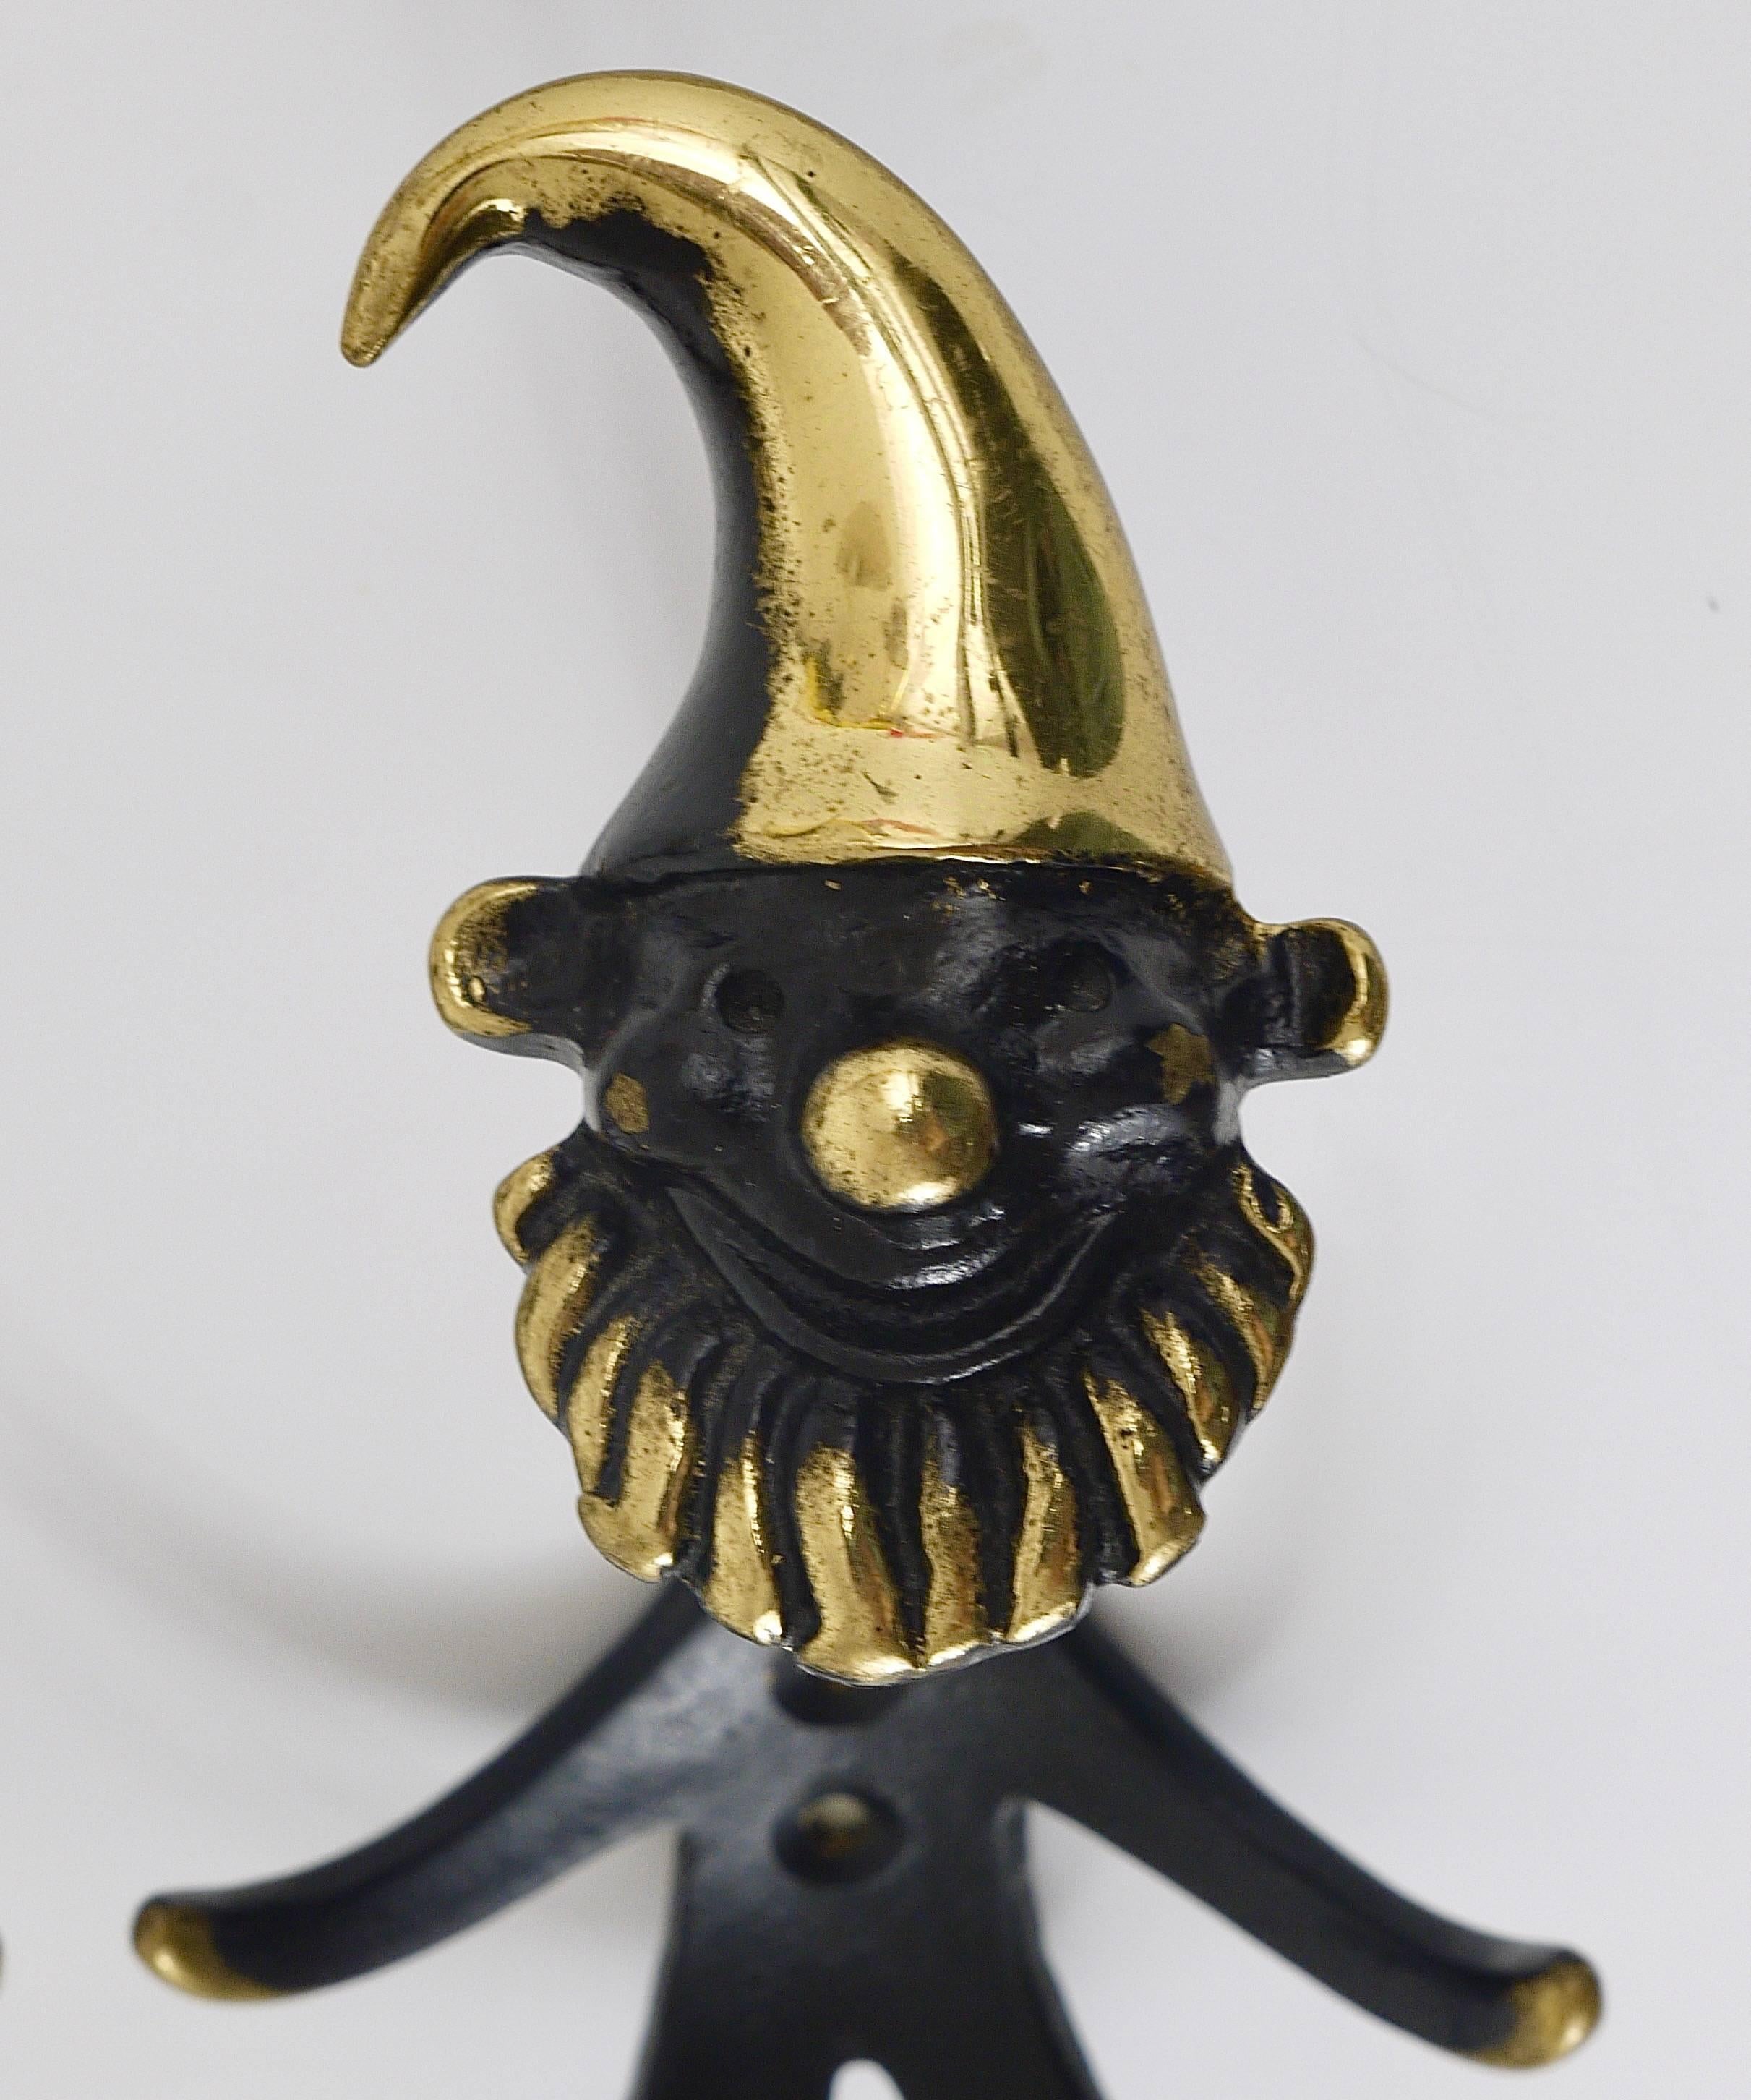 Up to three midcentury brass wall coat hooks, displaying a dwarf. A humorous design by Walter Bosse, executed by Hertha Baller Austria in the 1950s. Made of black finished brass. In very good condition. Each hook has a height of 7